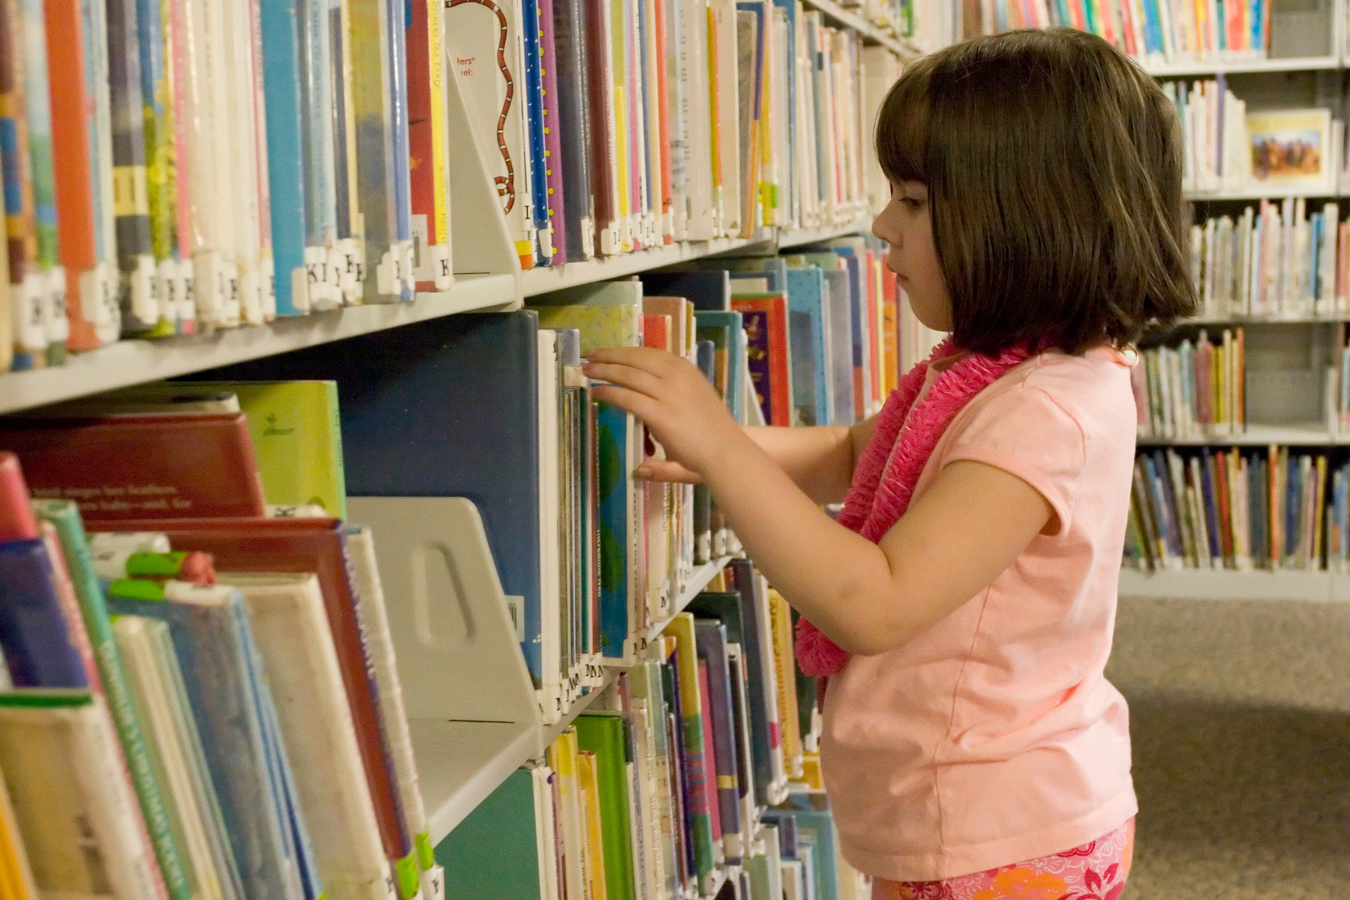 A little girl looking at books in a library. Arts and culture organizations using Sparkrock 365 ERP are more efficient, allowing them to focus on sharing the value and creativity of the arts with ample time and resources.